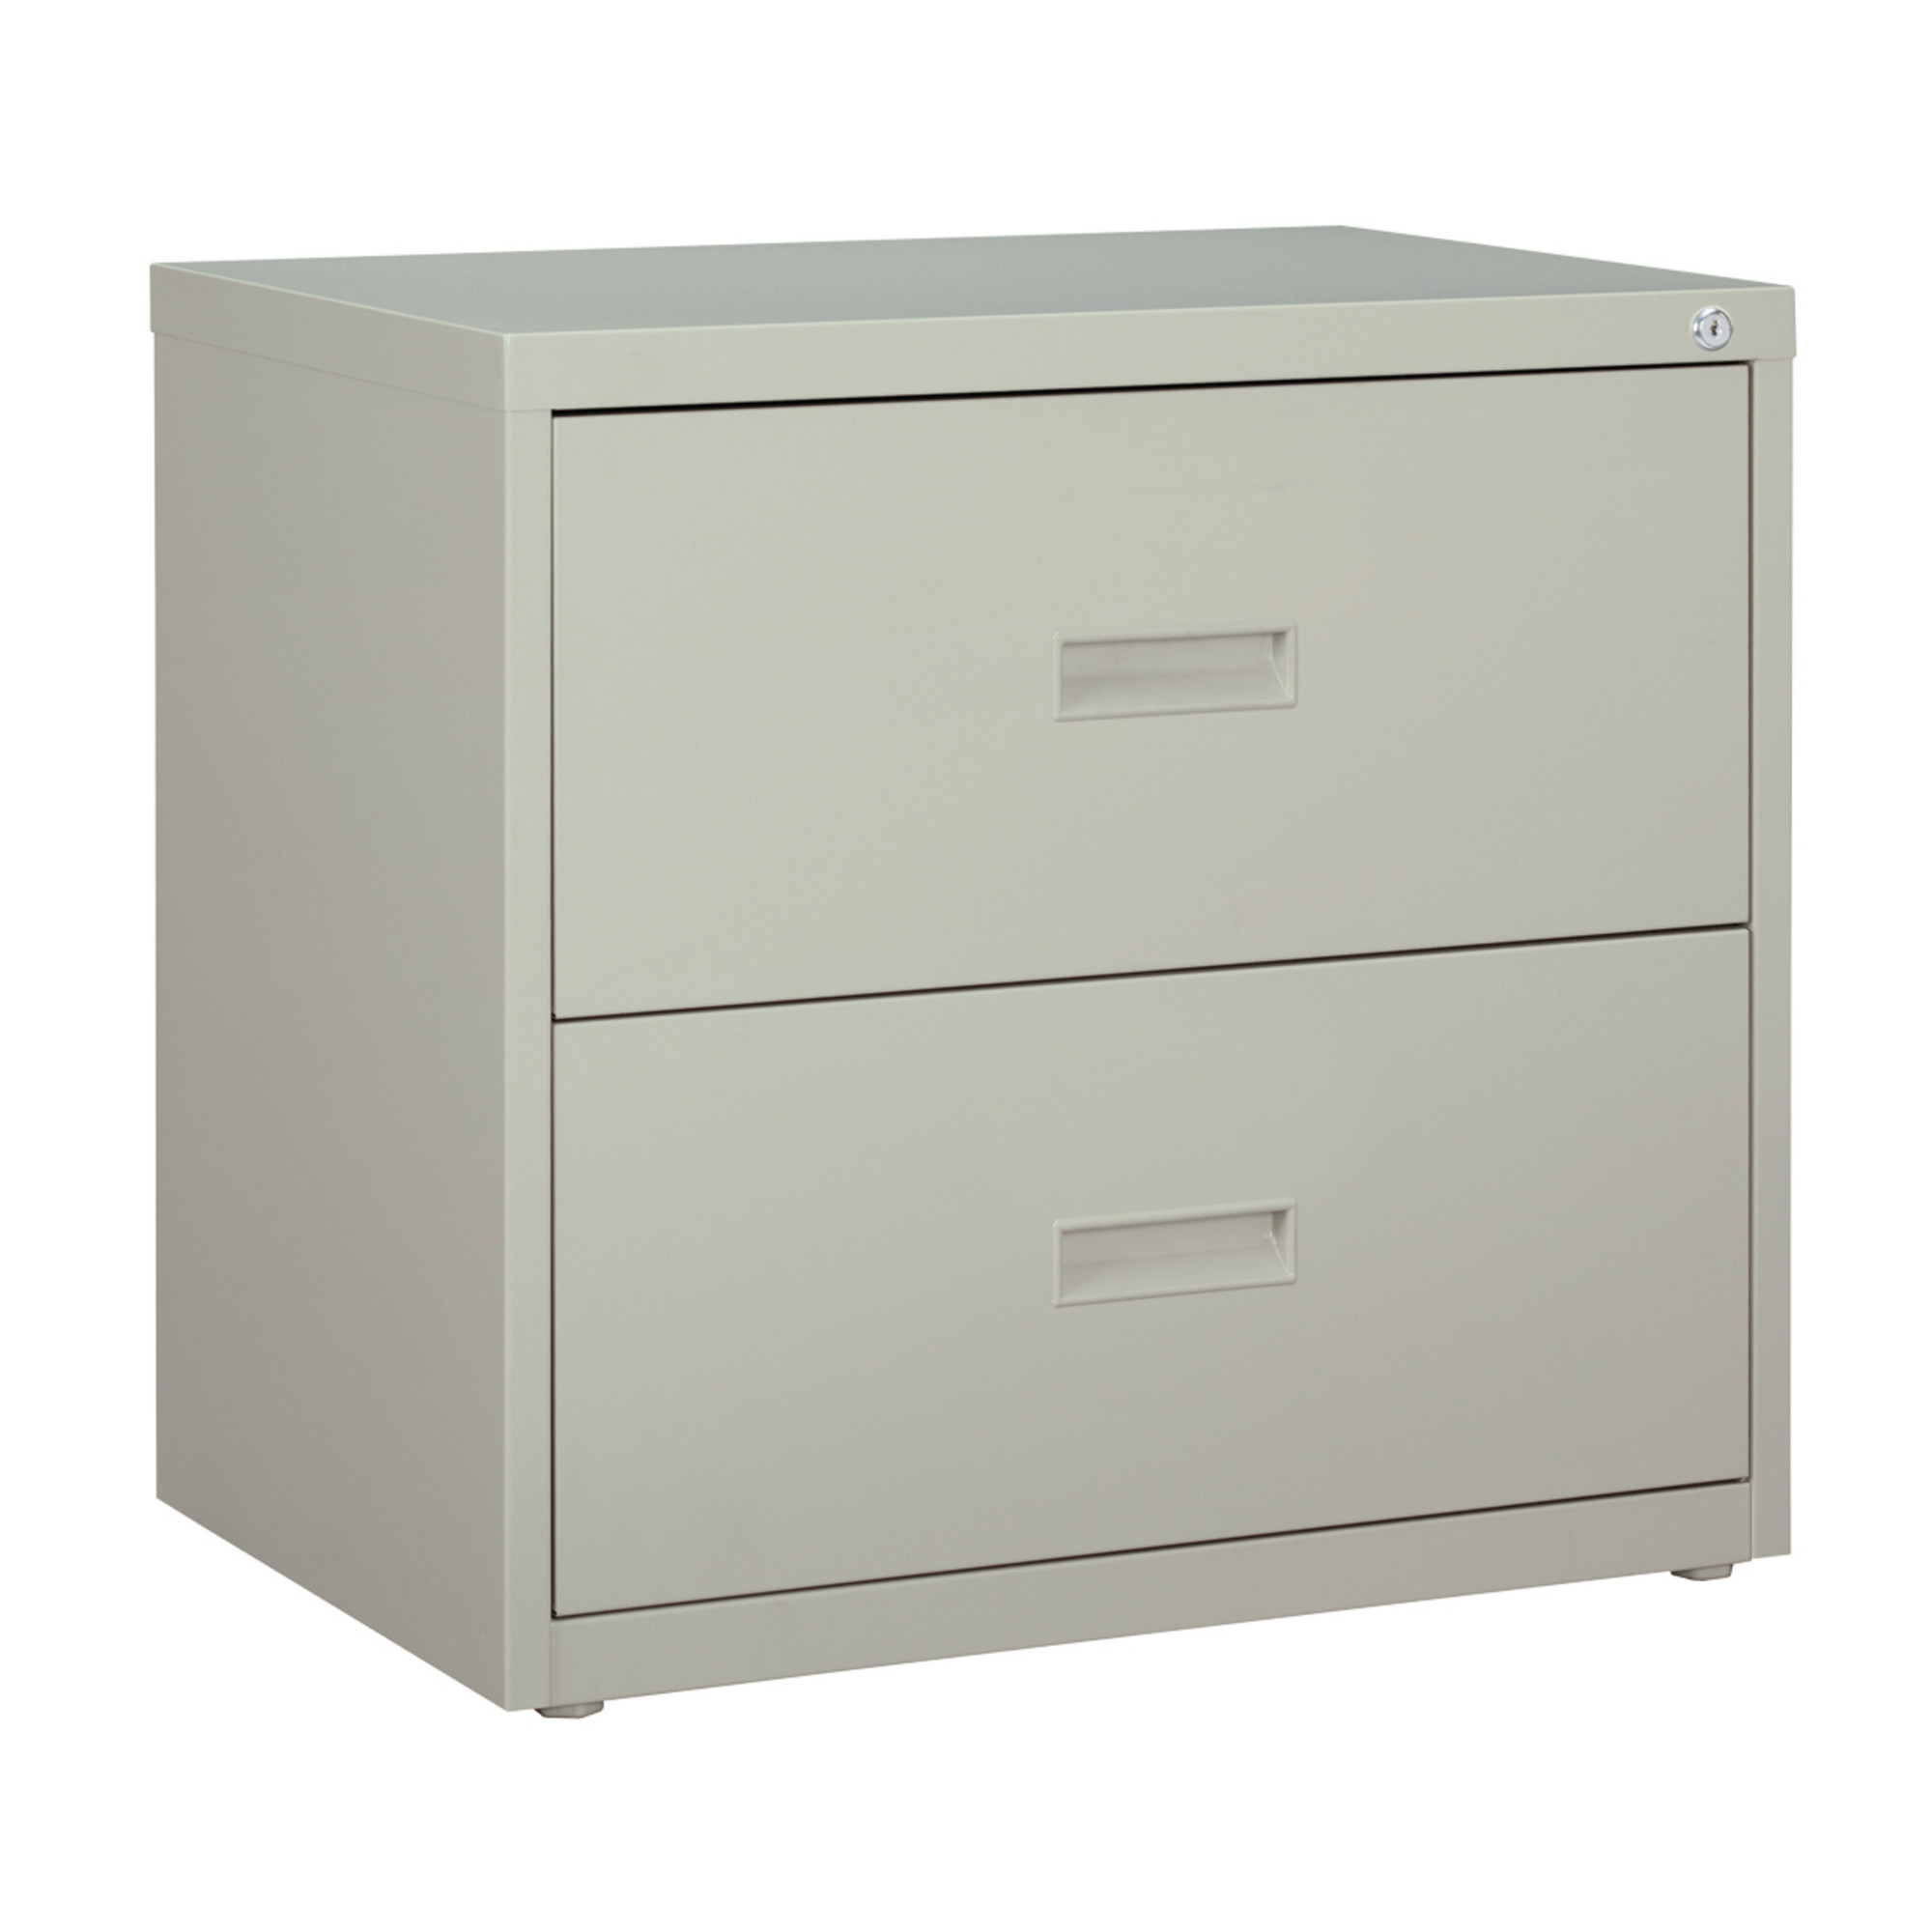 2 Drawer Lateral File Cabinet, Width 30 in, Depth 18.625 in, Height 28 in, Model - Hirsh Industries 19439